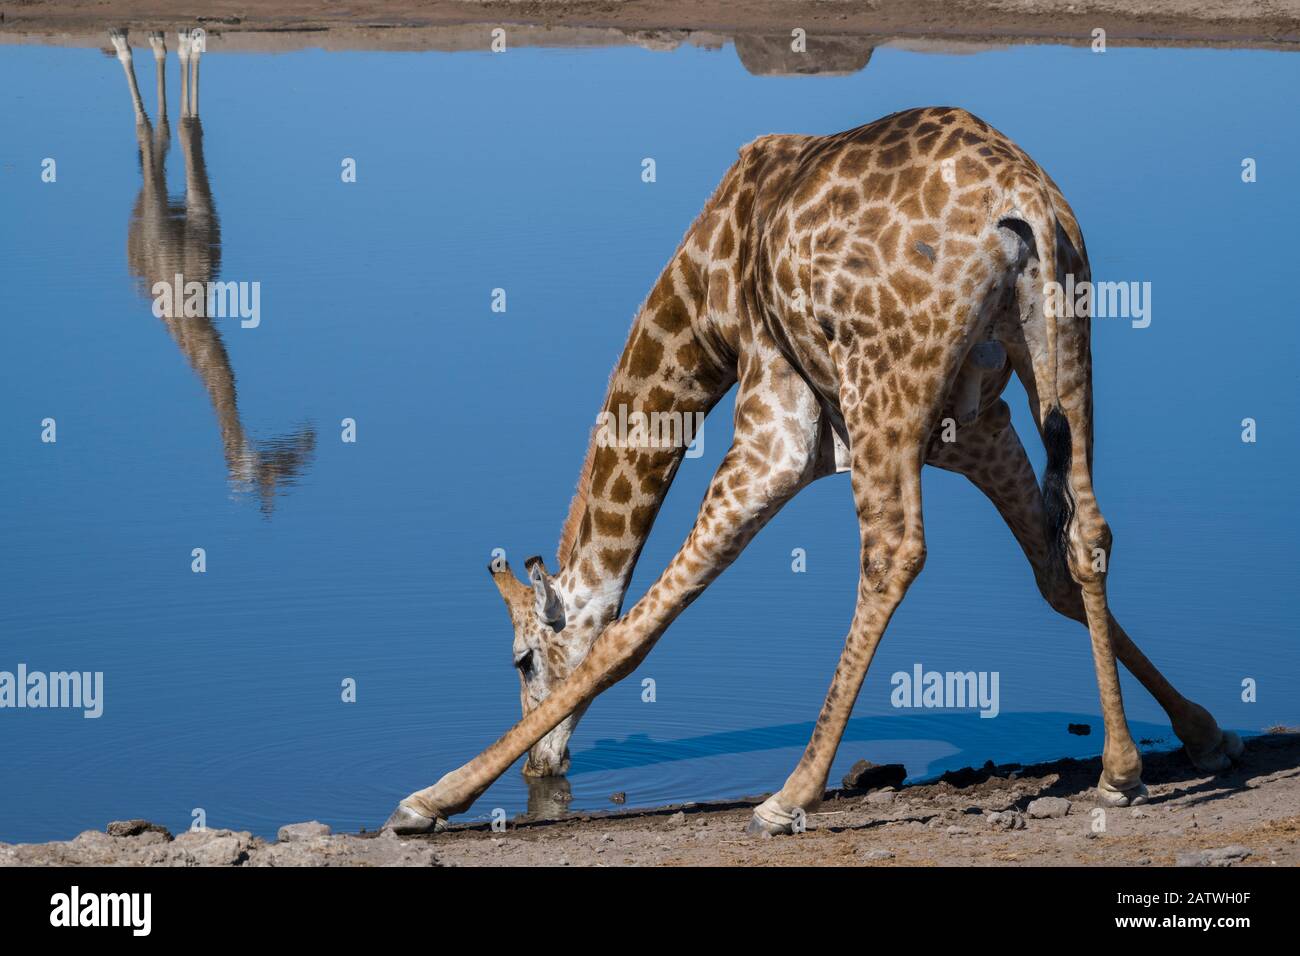 Common giraffe (Giraffa tippelskirchi) bending to drink at a waterhole, with another standing on the opposite side of the pool reflected in the water. Klein Namutoni waterhole, Etosha National Park, Namibia, May. Stock Photo